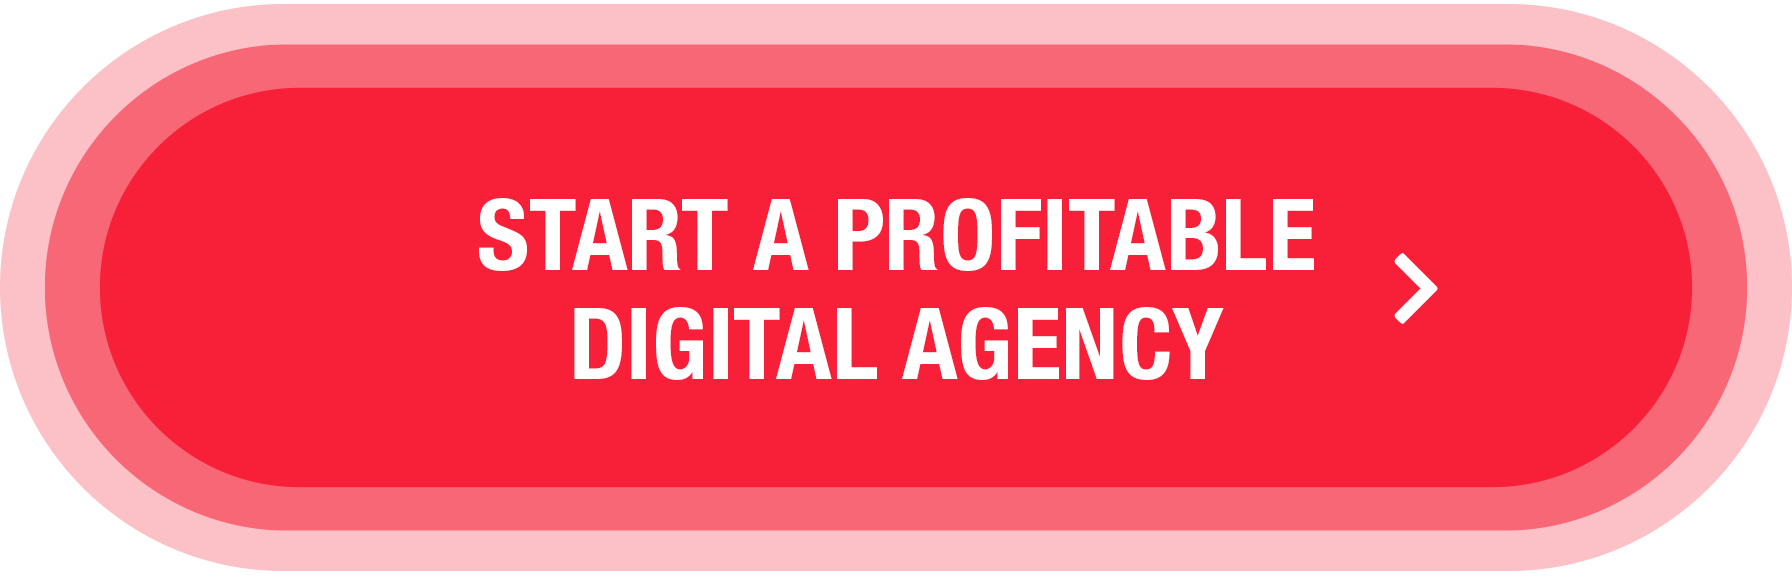 Start profitable digital agency - How to Get B2B Leads for Your Online Business